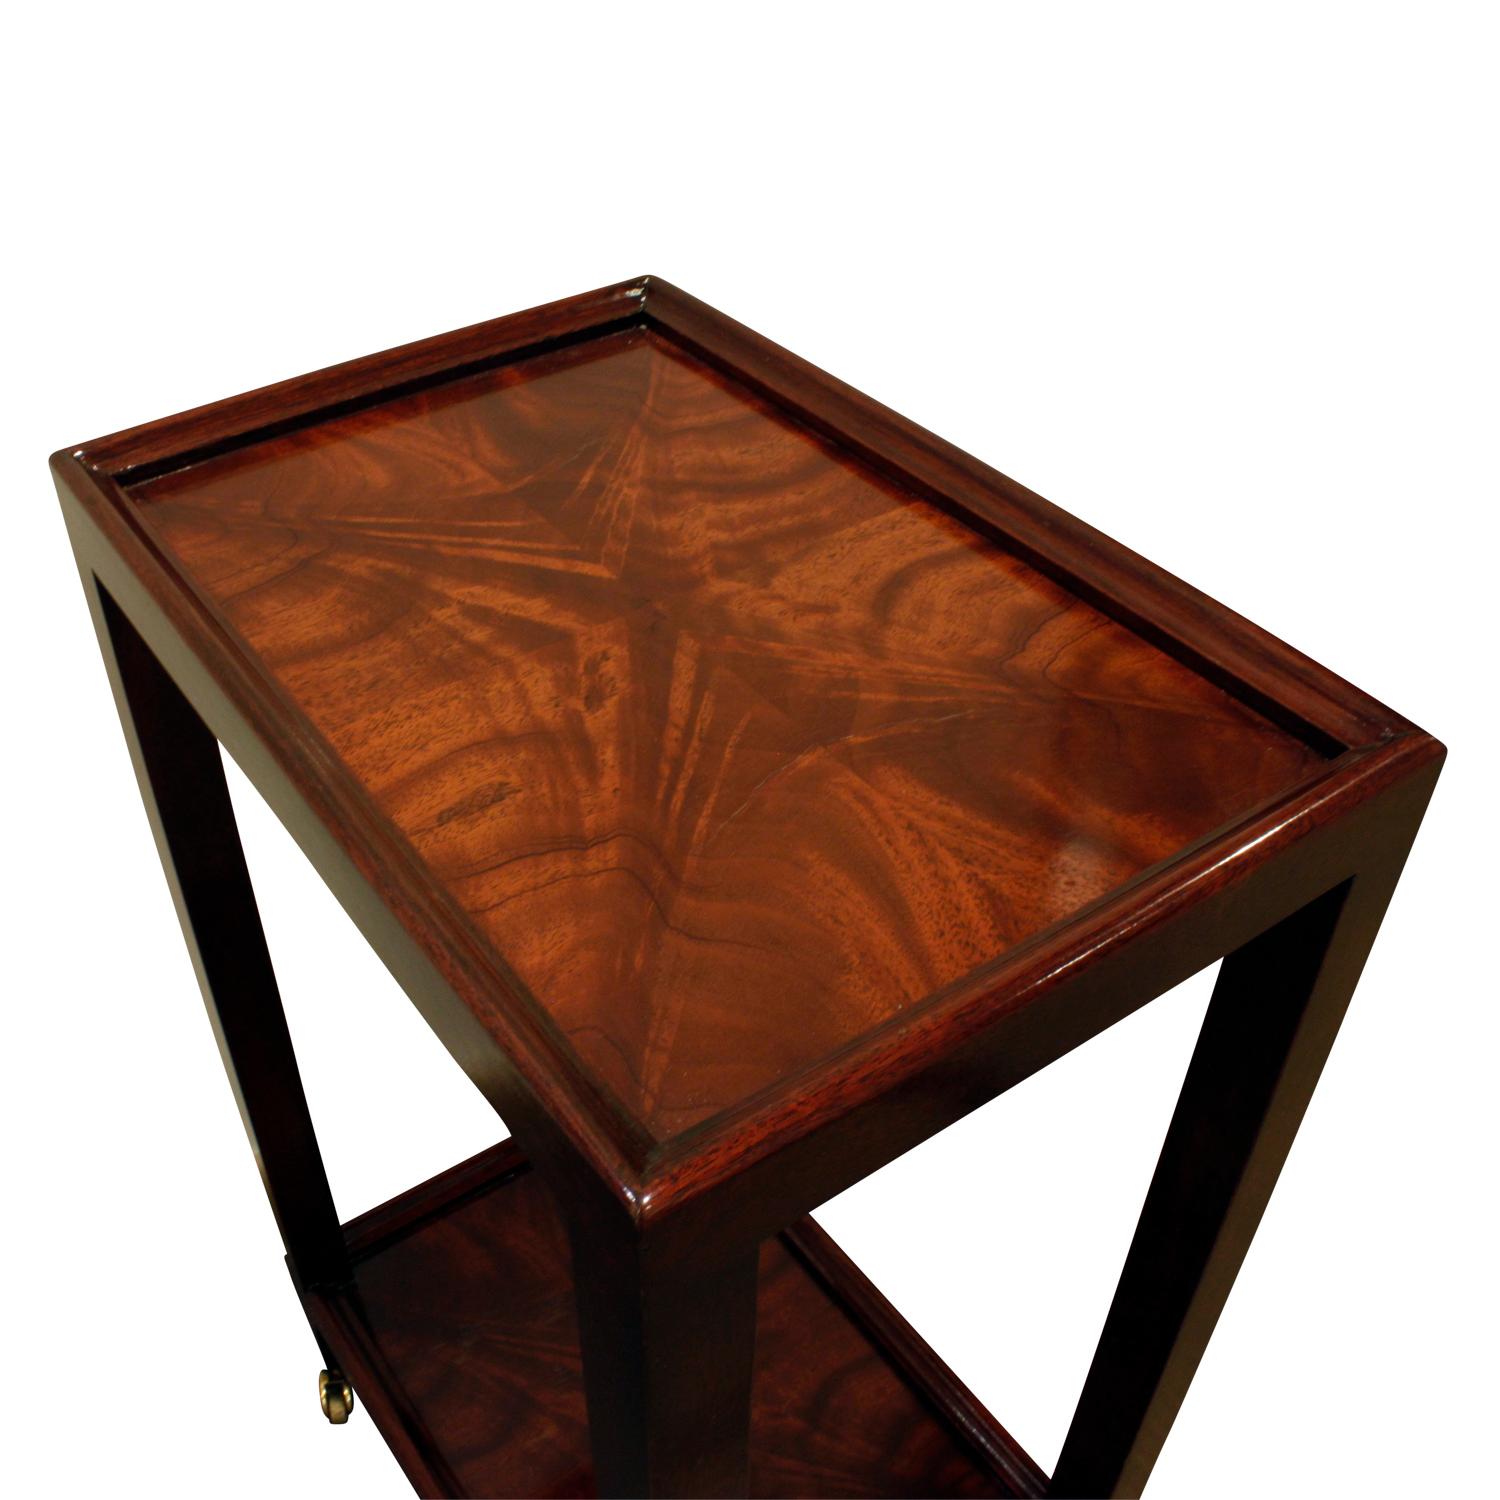 Hand-Crafted Karl Springer Telephone Table in Double Bookmatched Flame Mahogany, 2002